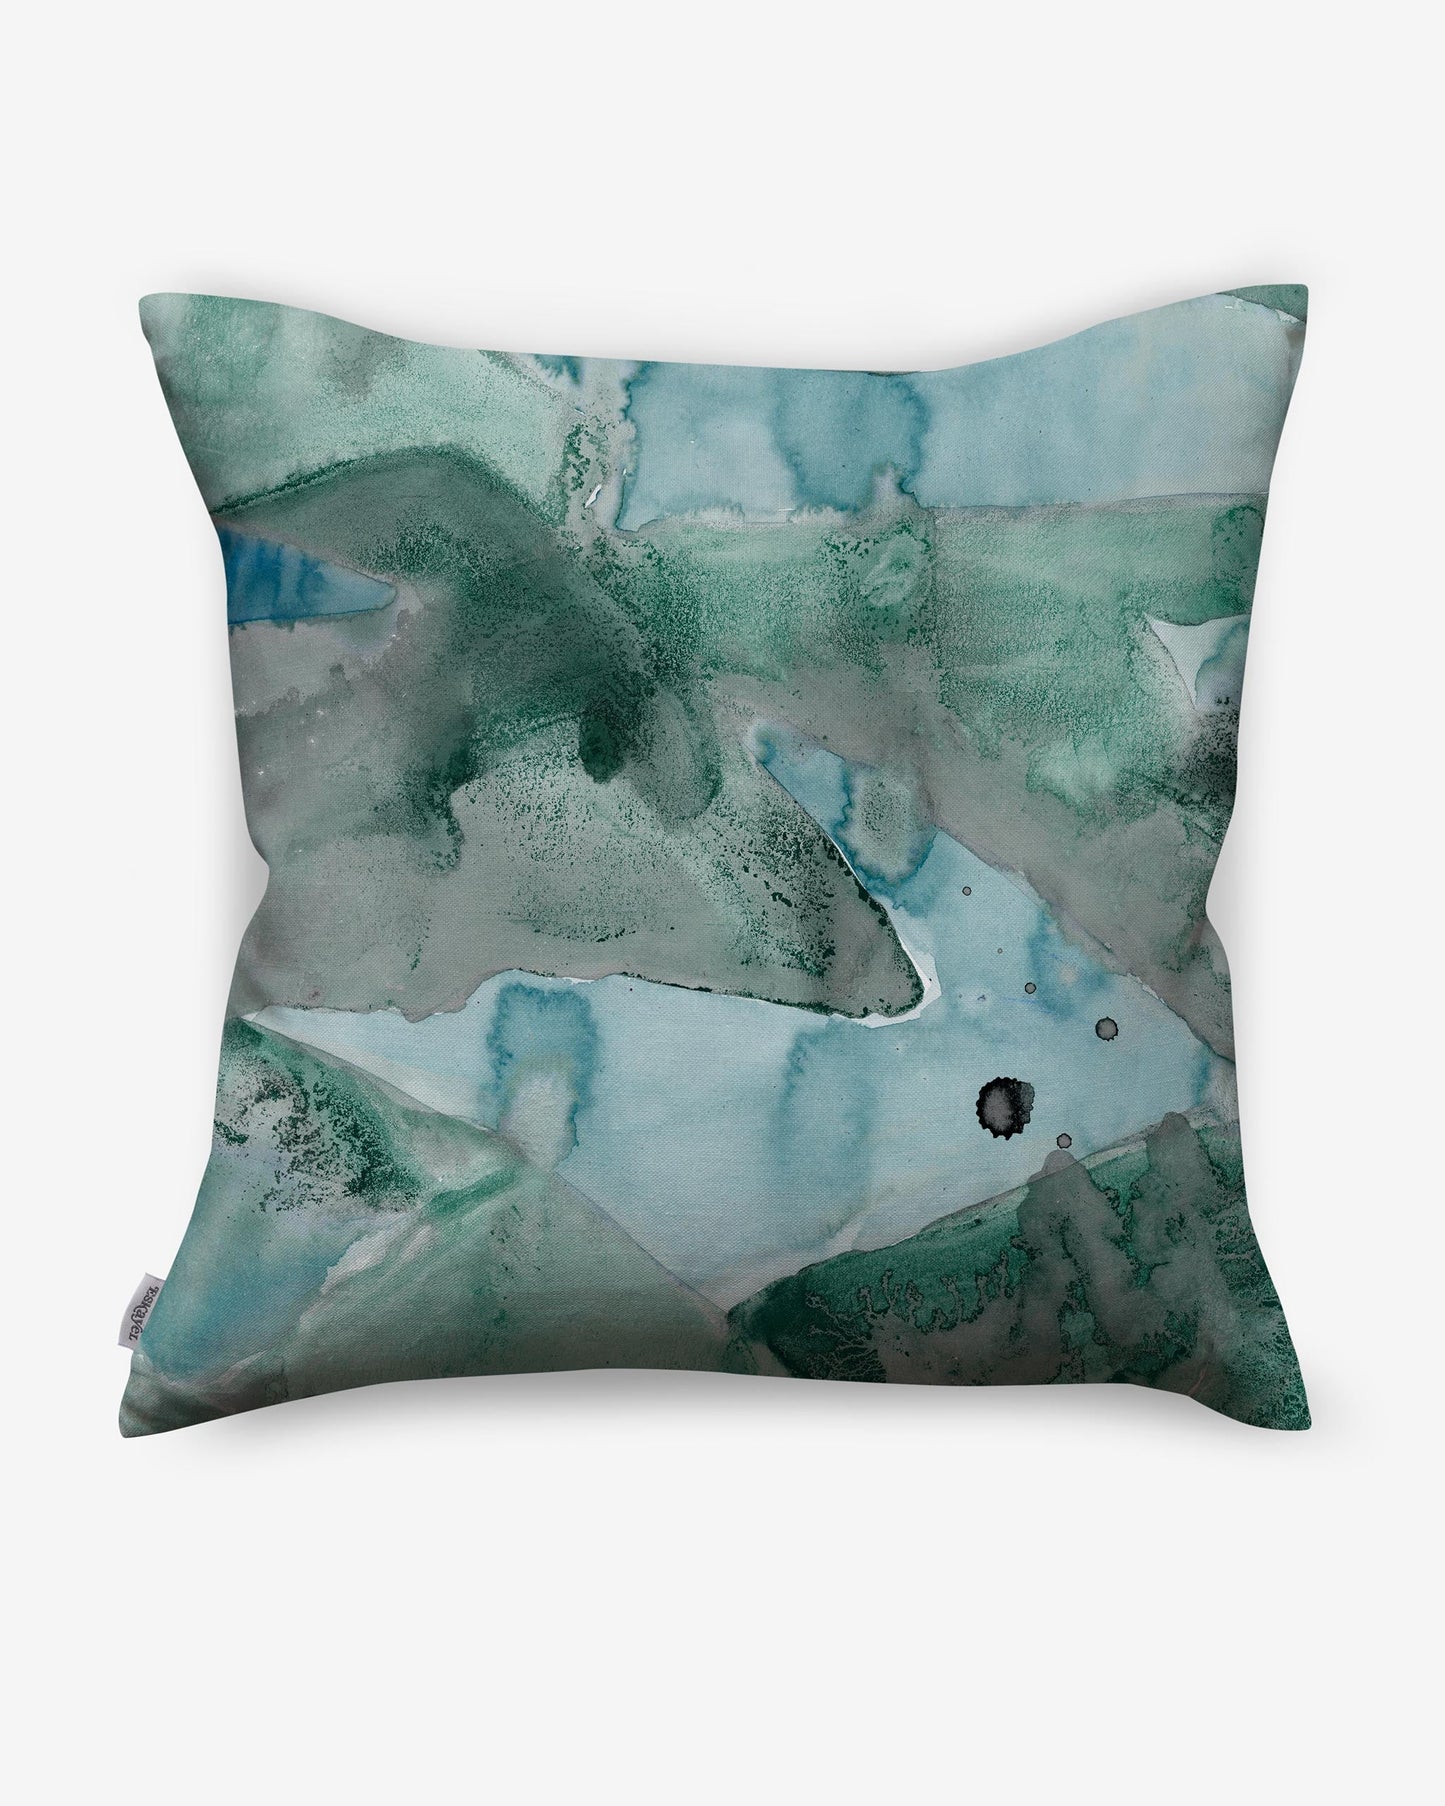 A luxurious Mani Pillow with a vibrant Mani-inspired watercolor painting in green and blue colorways